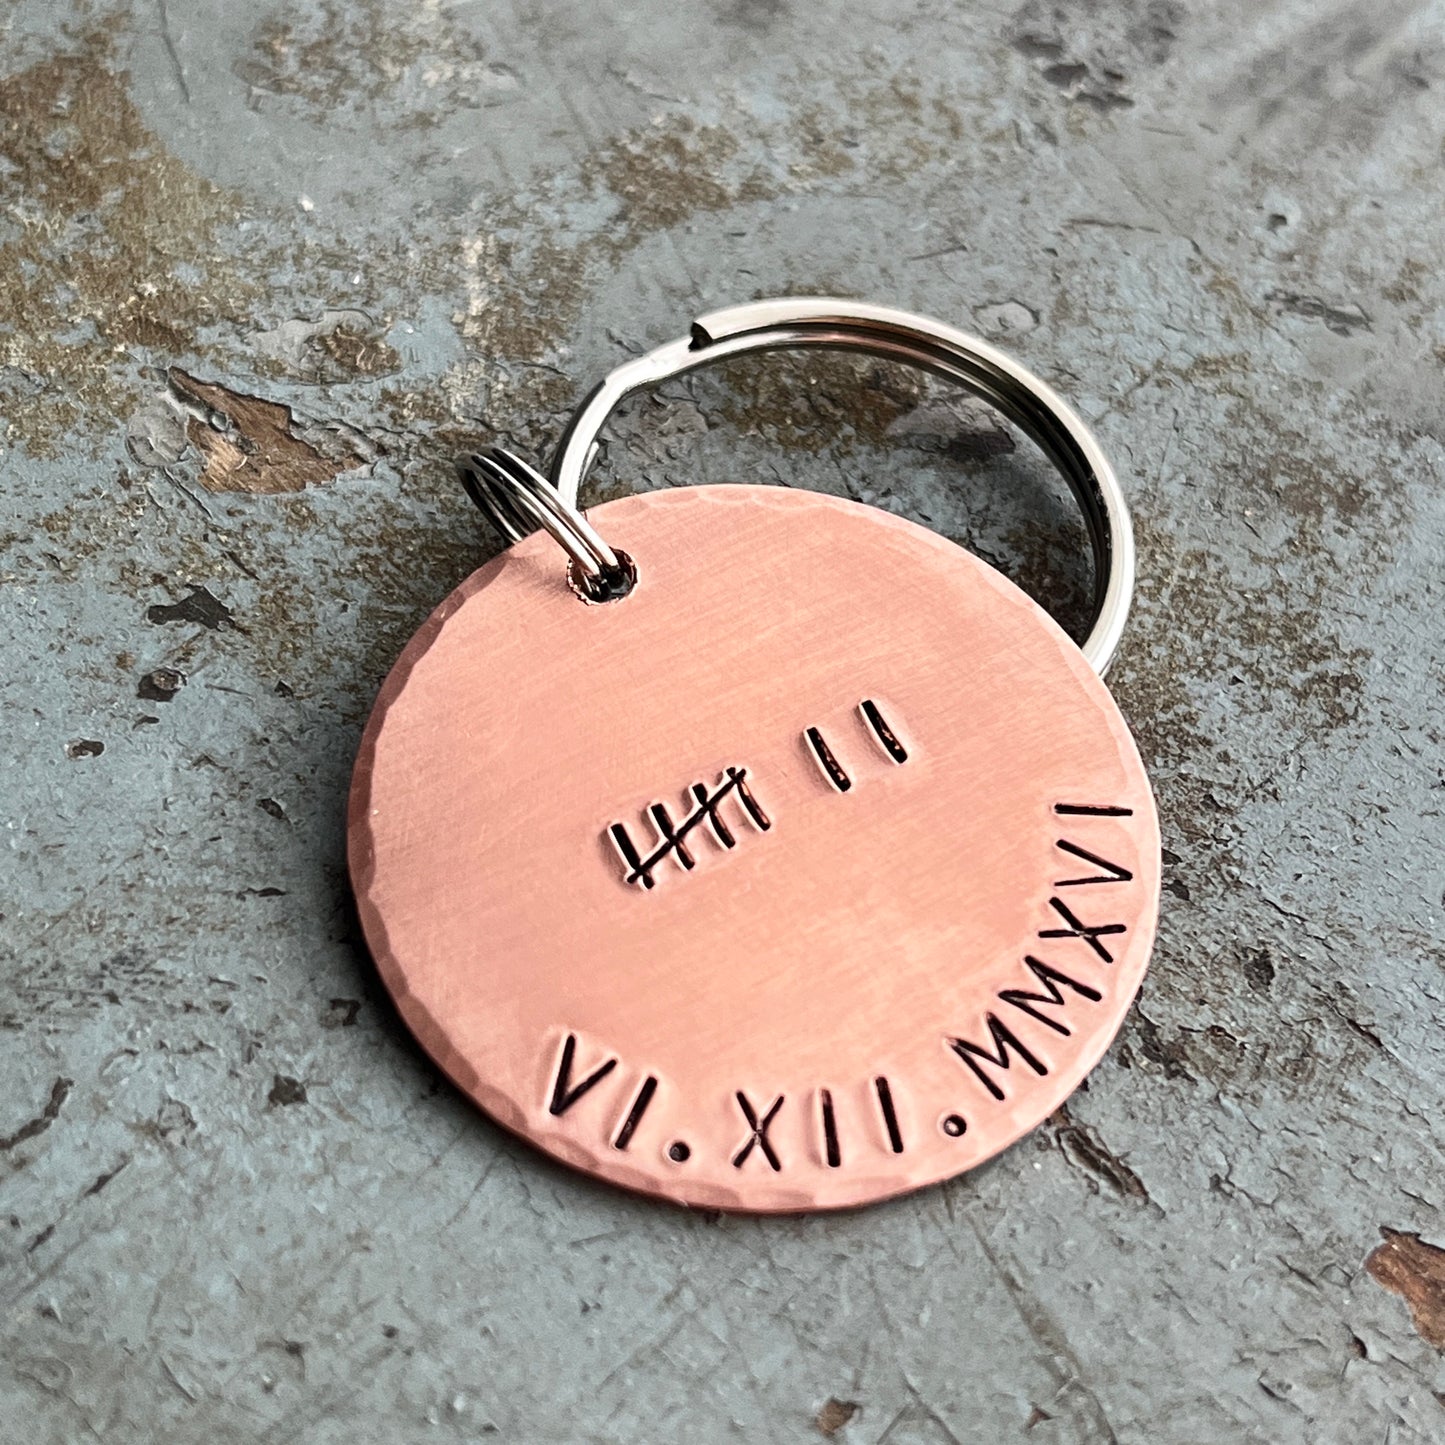 7th Anniversary Gift - Copper Anniversary Personalized Keychain